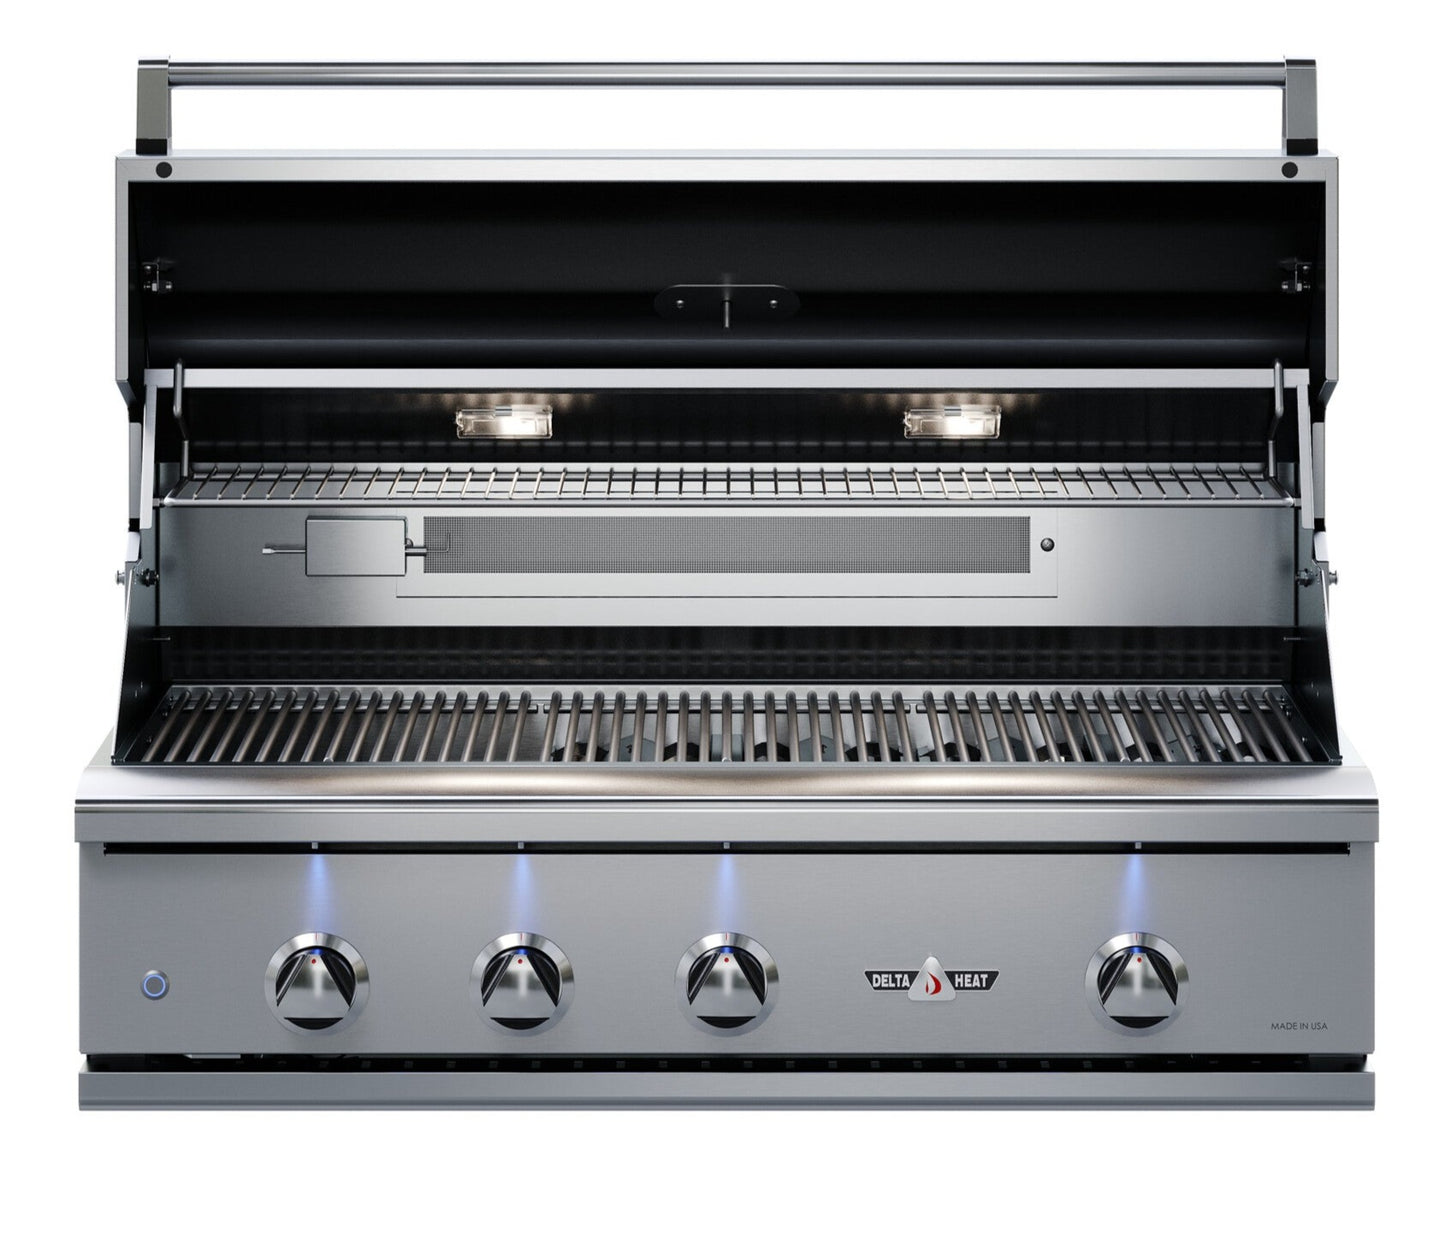 Delta Heat 38 Inch Propane Grill with Rotisserie